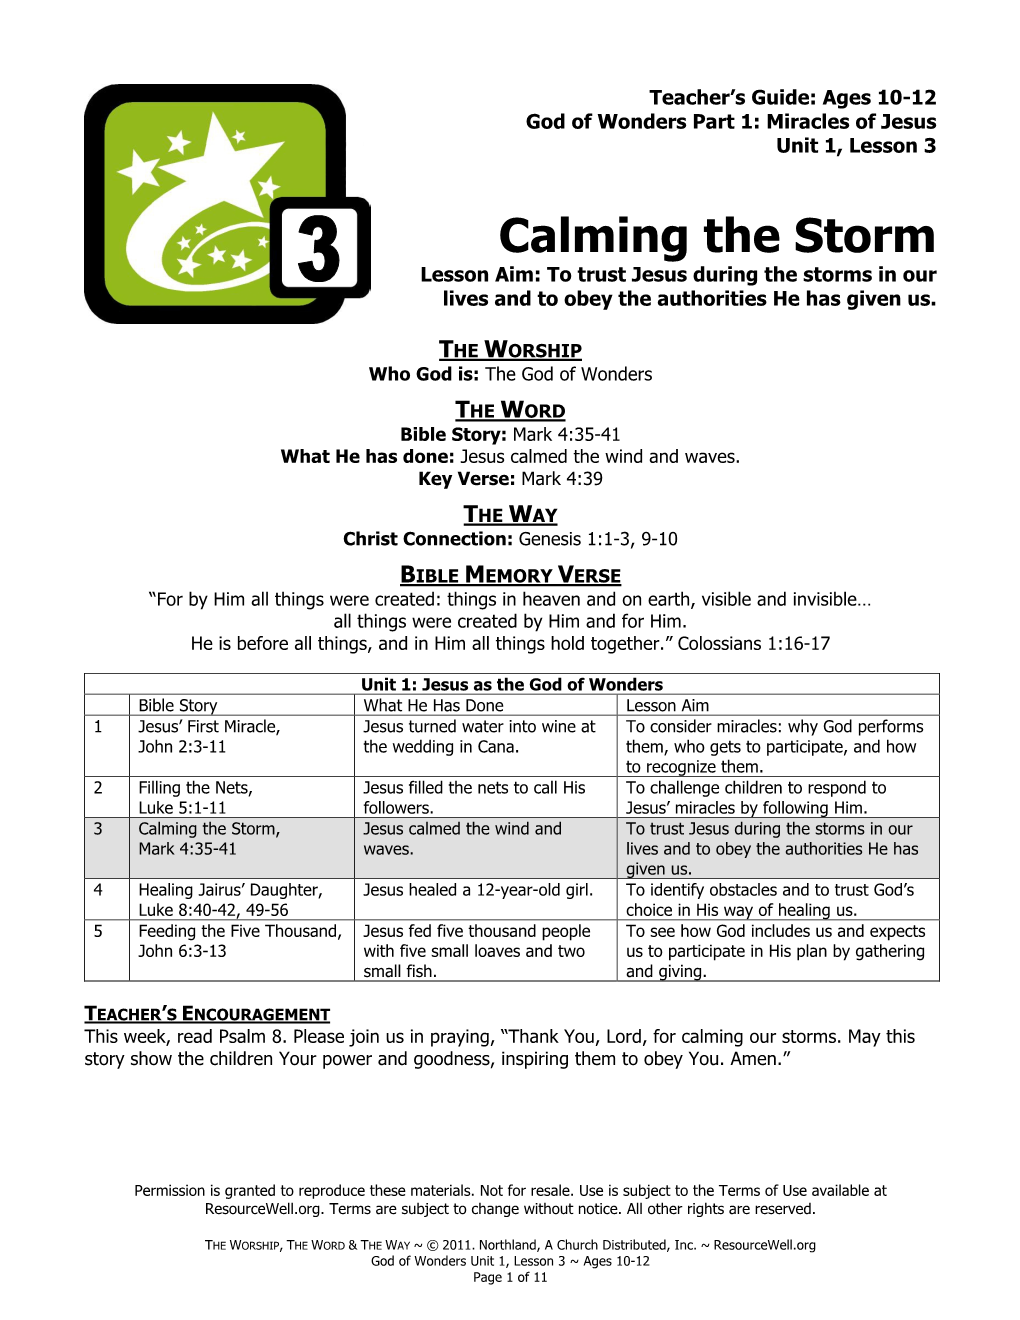 Calming the Storm Lesson Aim: to Trust Jesus During the Storms in Our Lives and to Obey the Authorities He Has Given Us